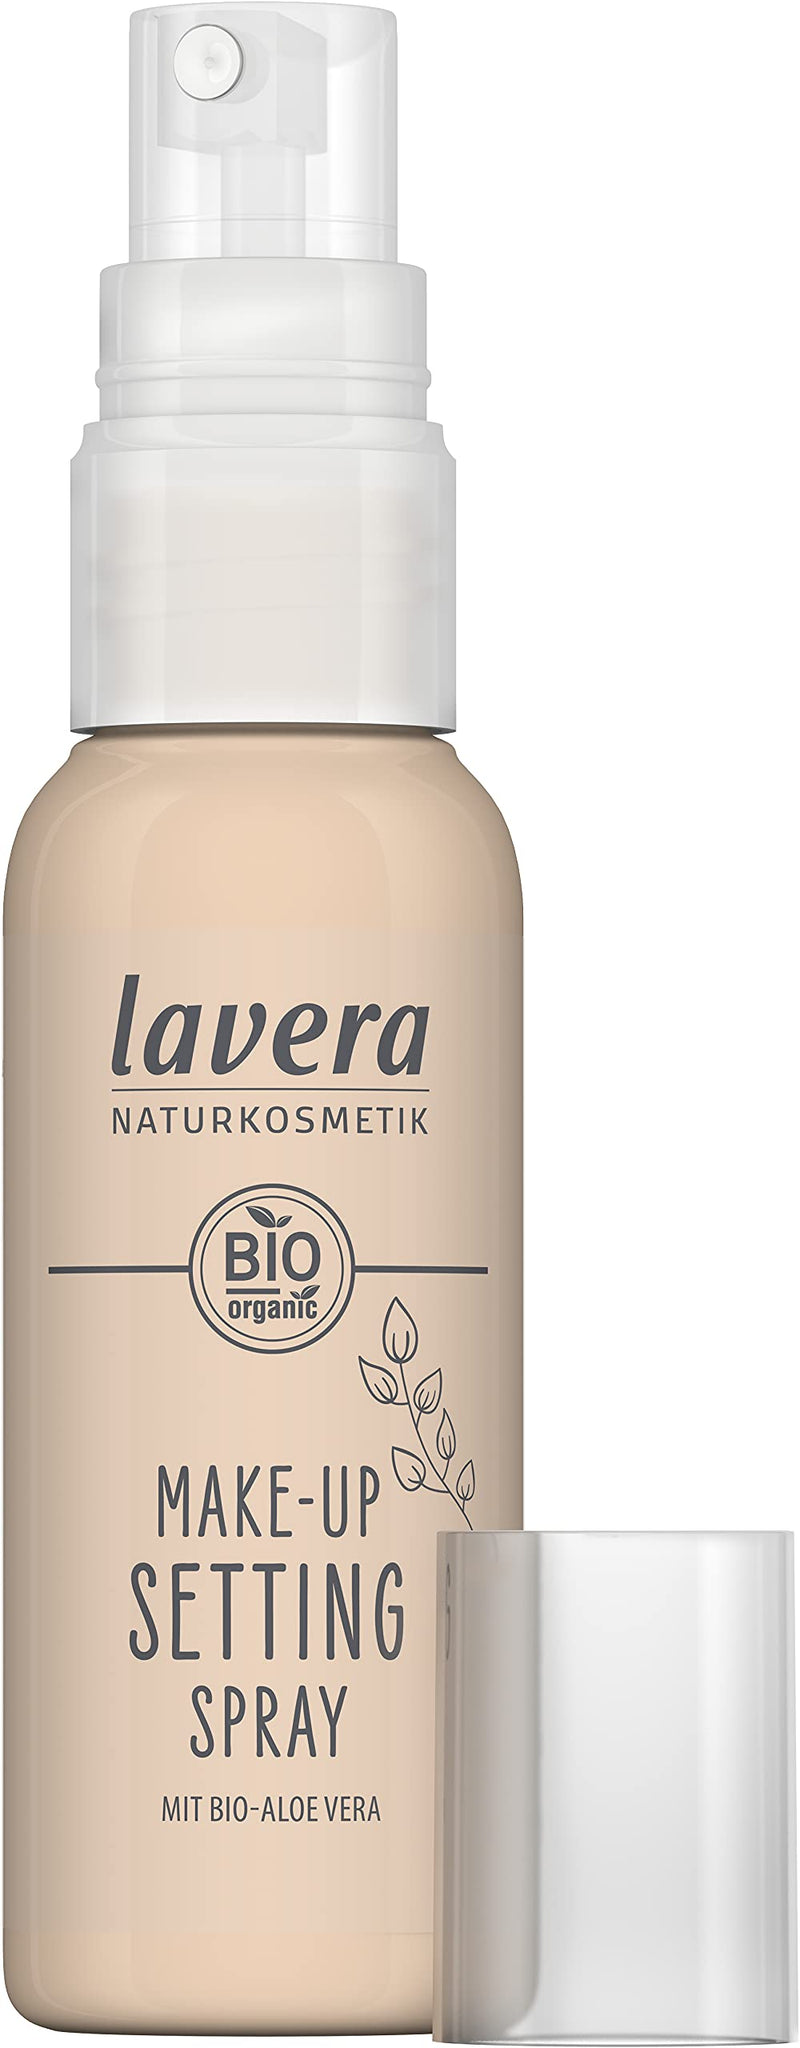 lavera Make-up Setting Spray - refresh - natural cosmetics - Vegan - free from alcohol - free from silicones - Suitable for all skin types - Organic aloe vera & Vegetable gylcerin - 50ml, transparent - NewNest Australia